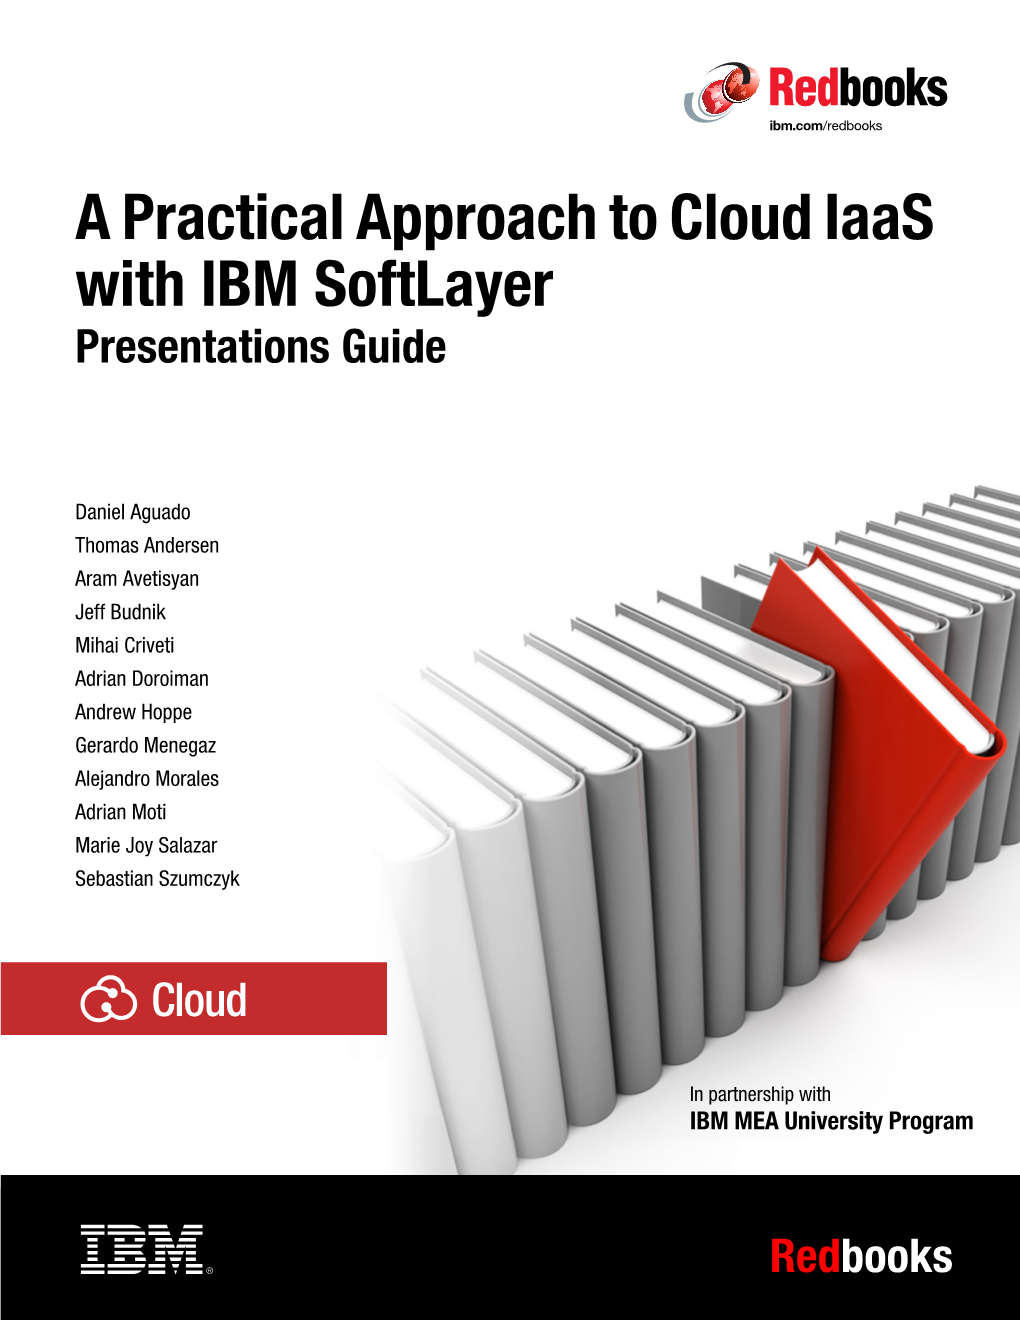 A Practical Approach to Cloud Iaas with IBM Softlayer Presentations Guide